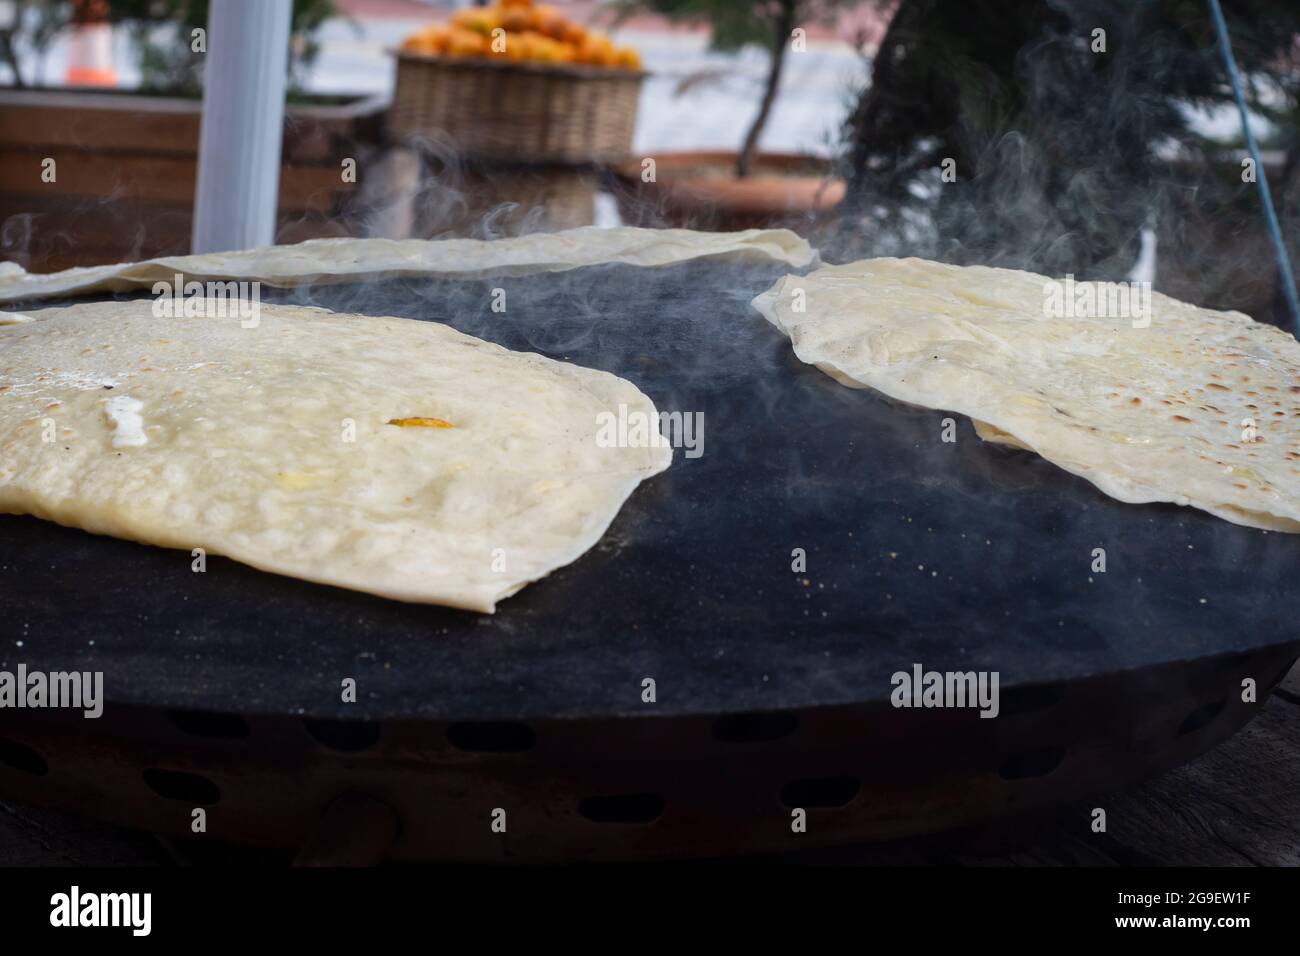 street food: pancake. local woman cooks pancakes on metal sheet, in which she puts cheese, spinach, or potatoes. Selective Focus Pancakes. Stock Photo